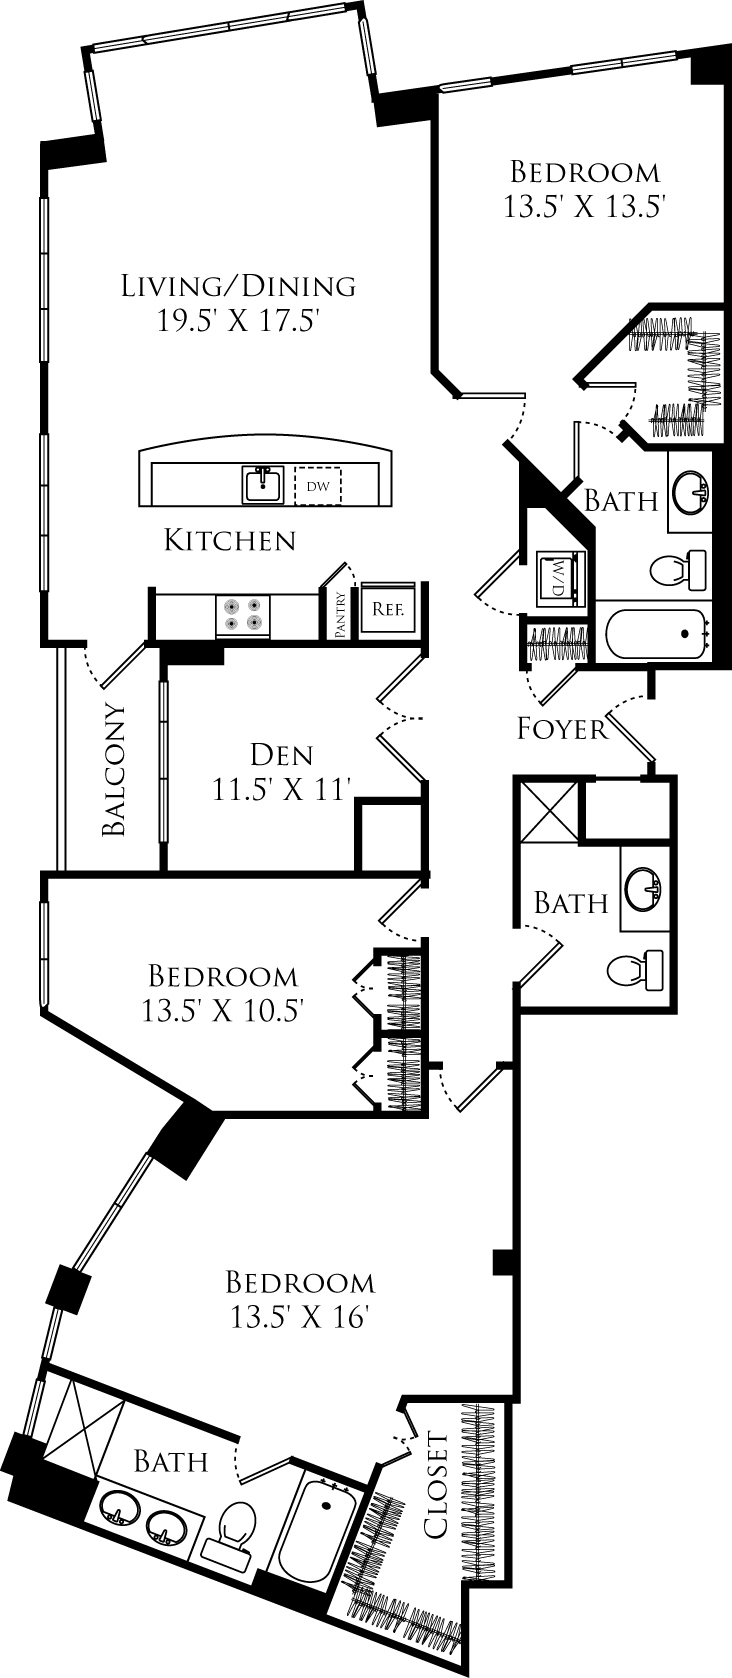 C3K + den floor plan is 3 beds, 3 baths and is 1920 square feet